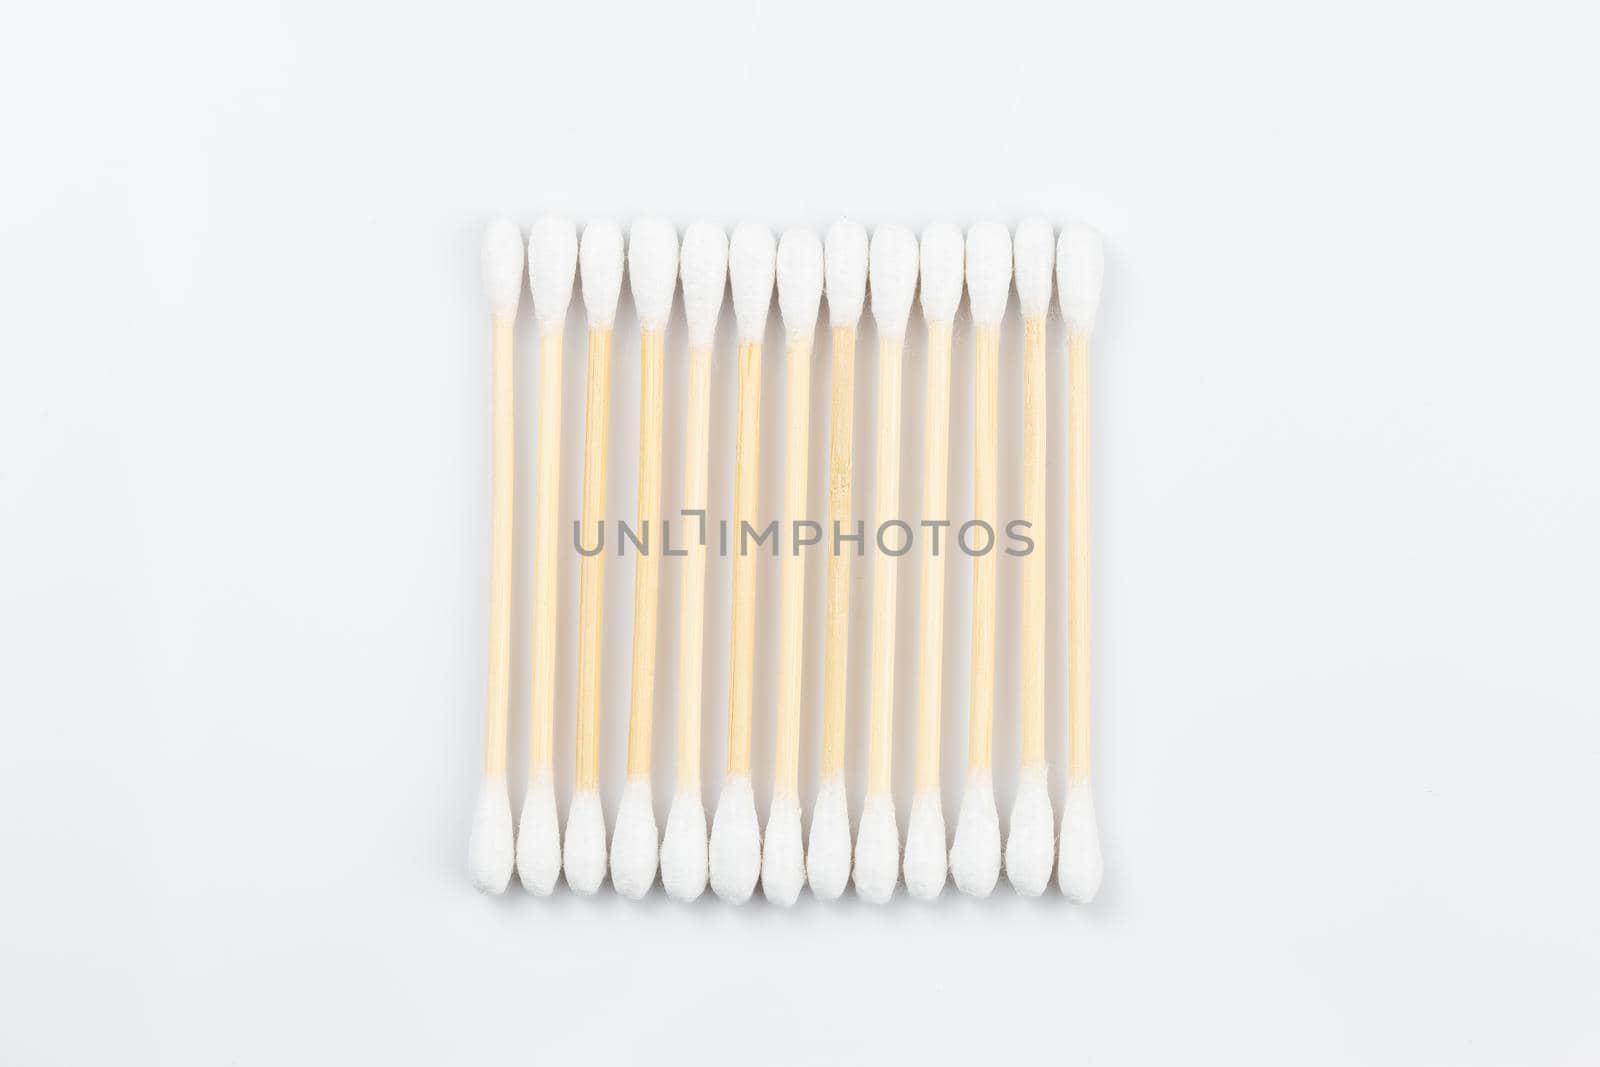 Wooden cotton swabs in a row on white background. Sustainable lifestyle concept